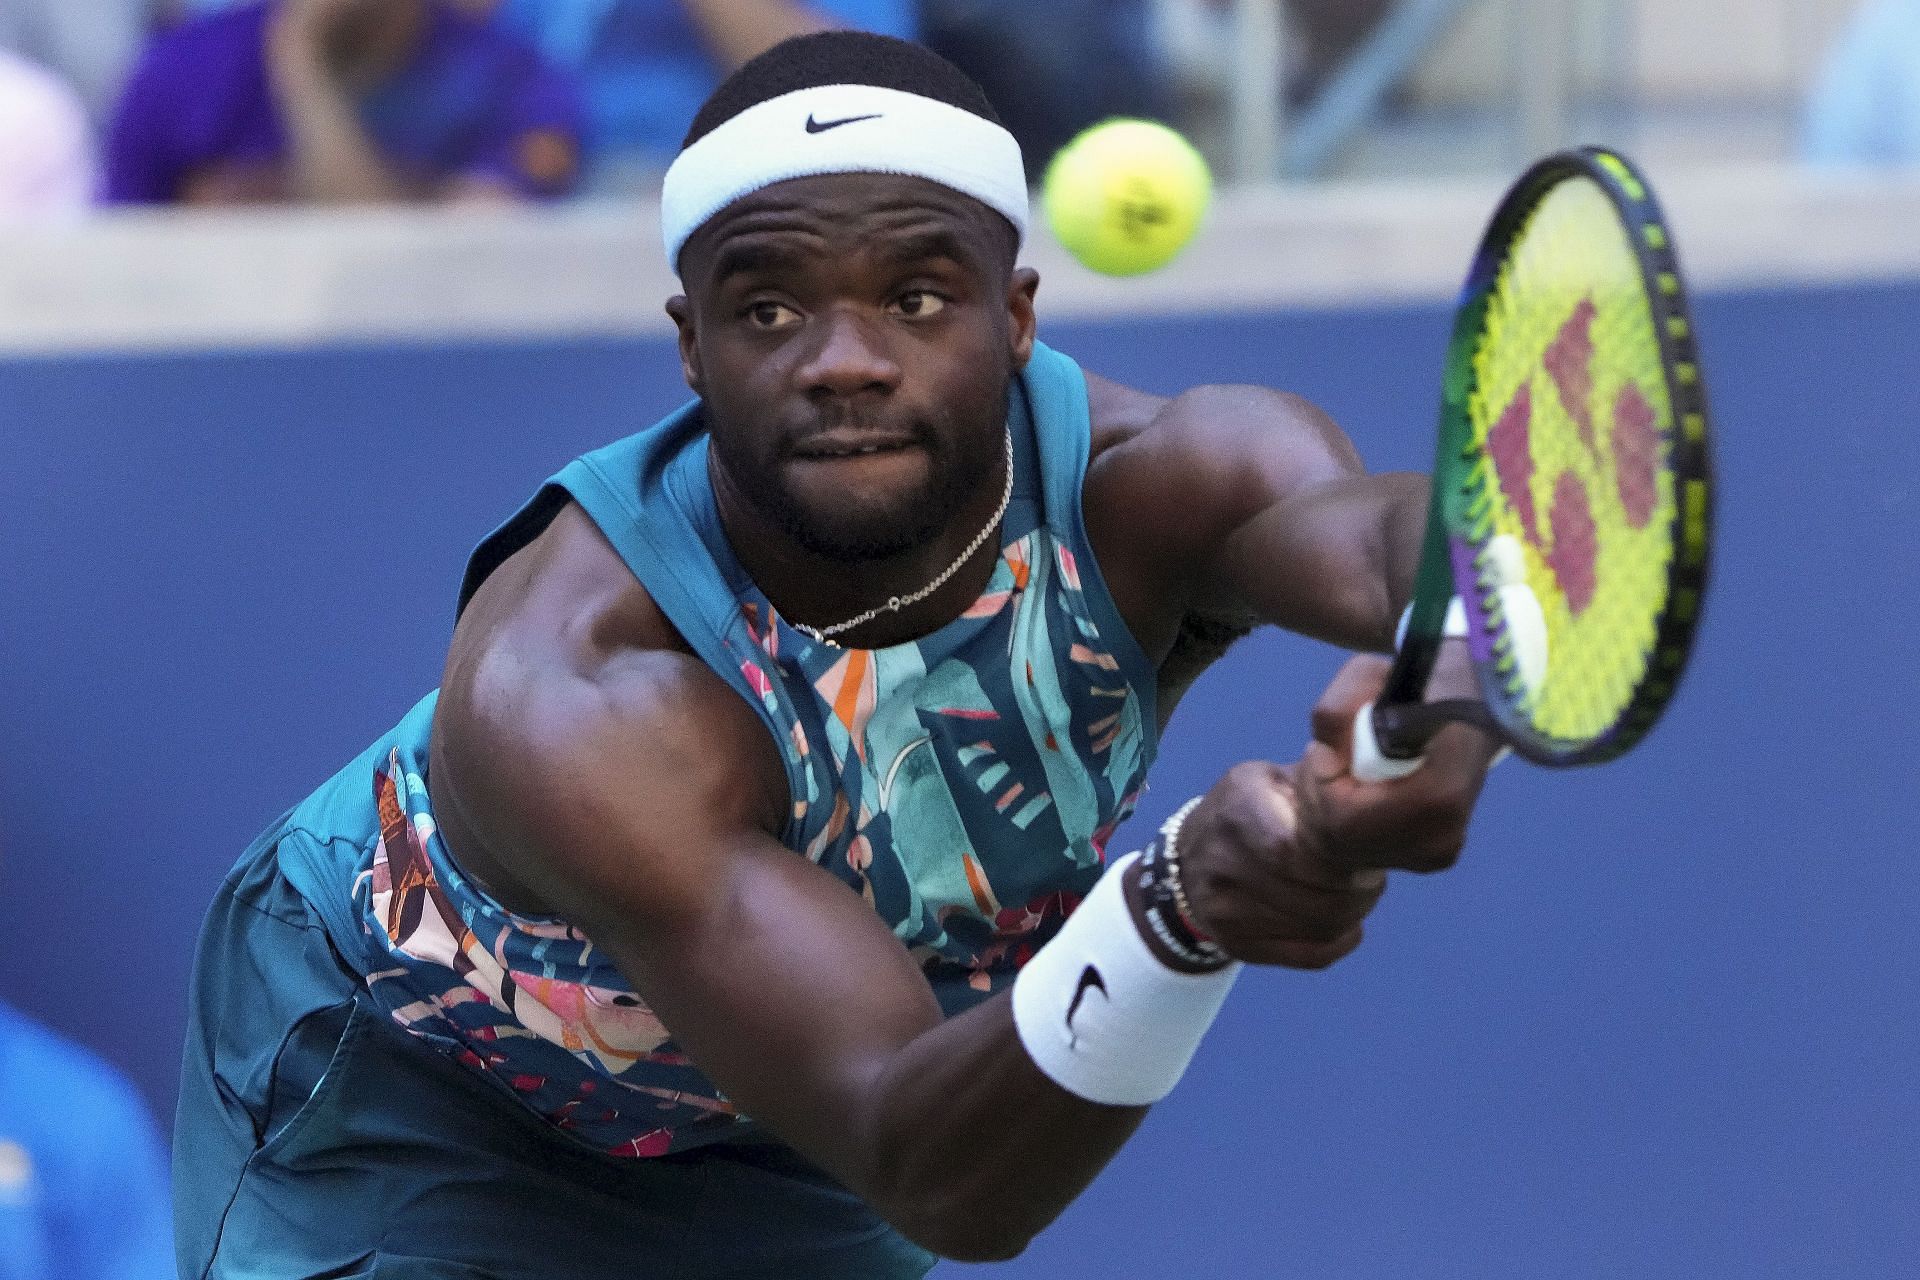 Frances Tiafoe is in the fourth round